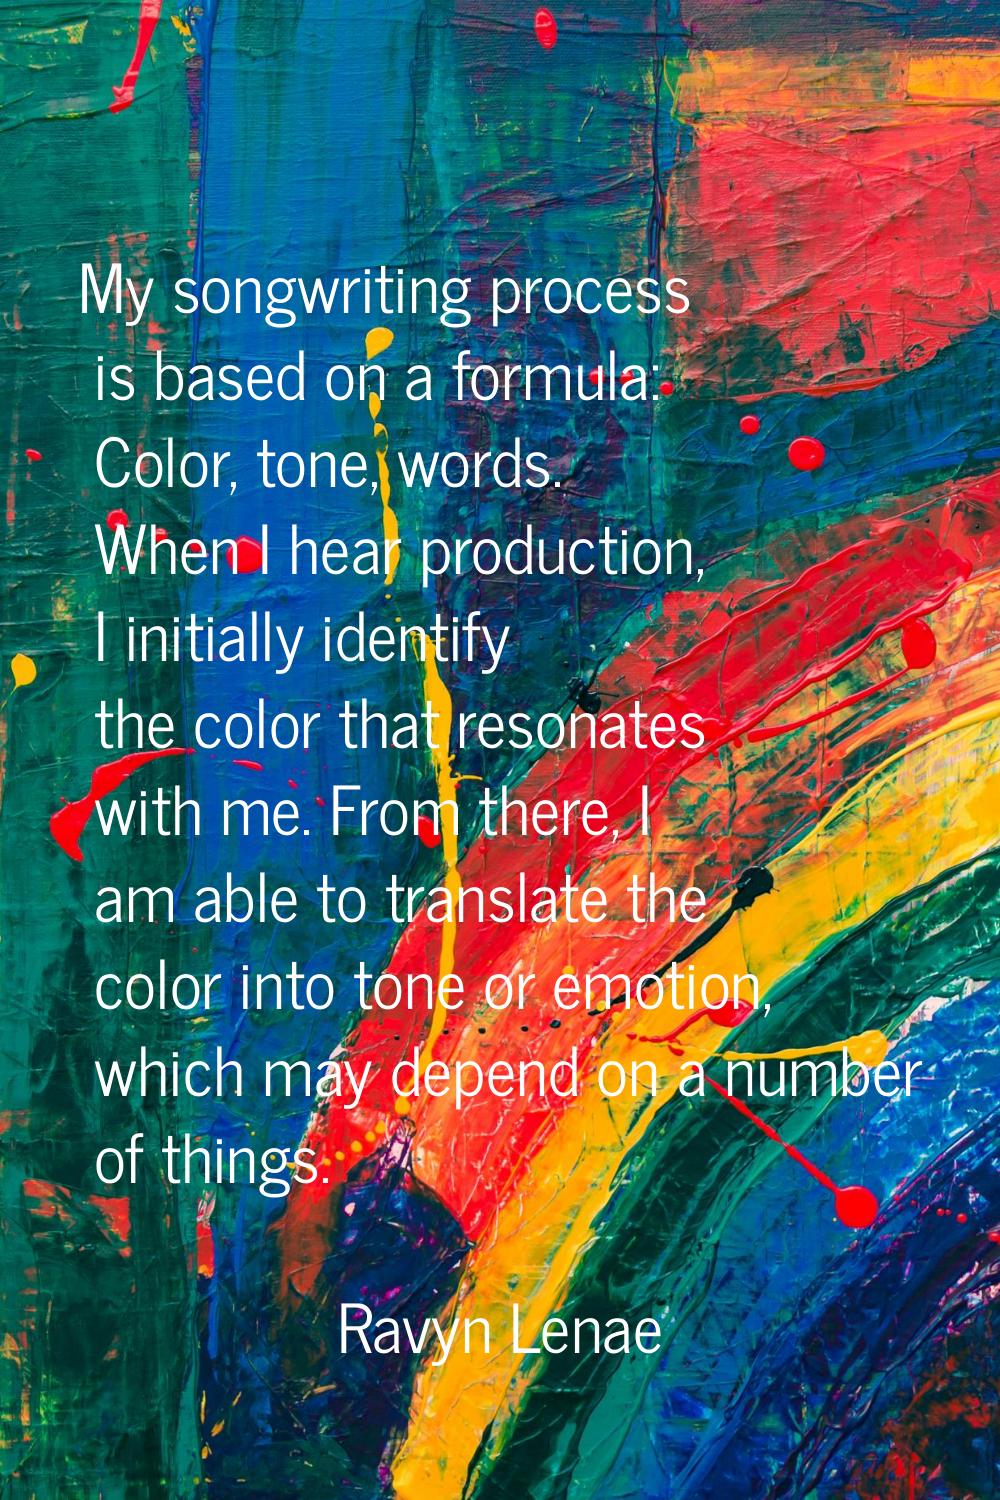 My songwriting process is based on a formula: Color, tone, words. When I hear production, I initial